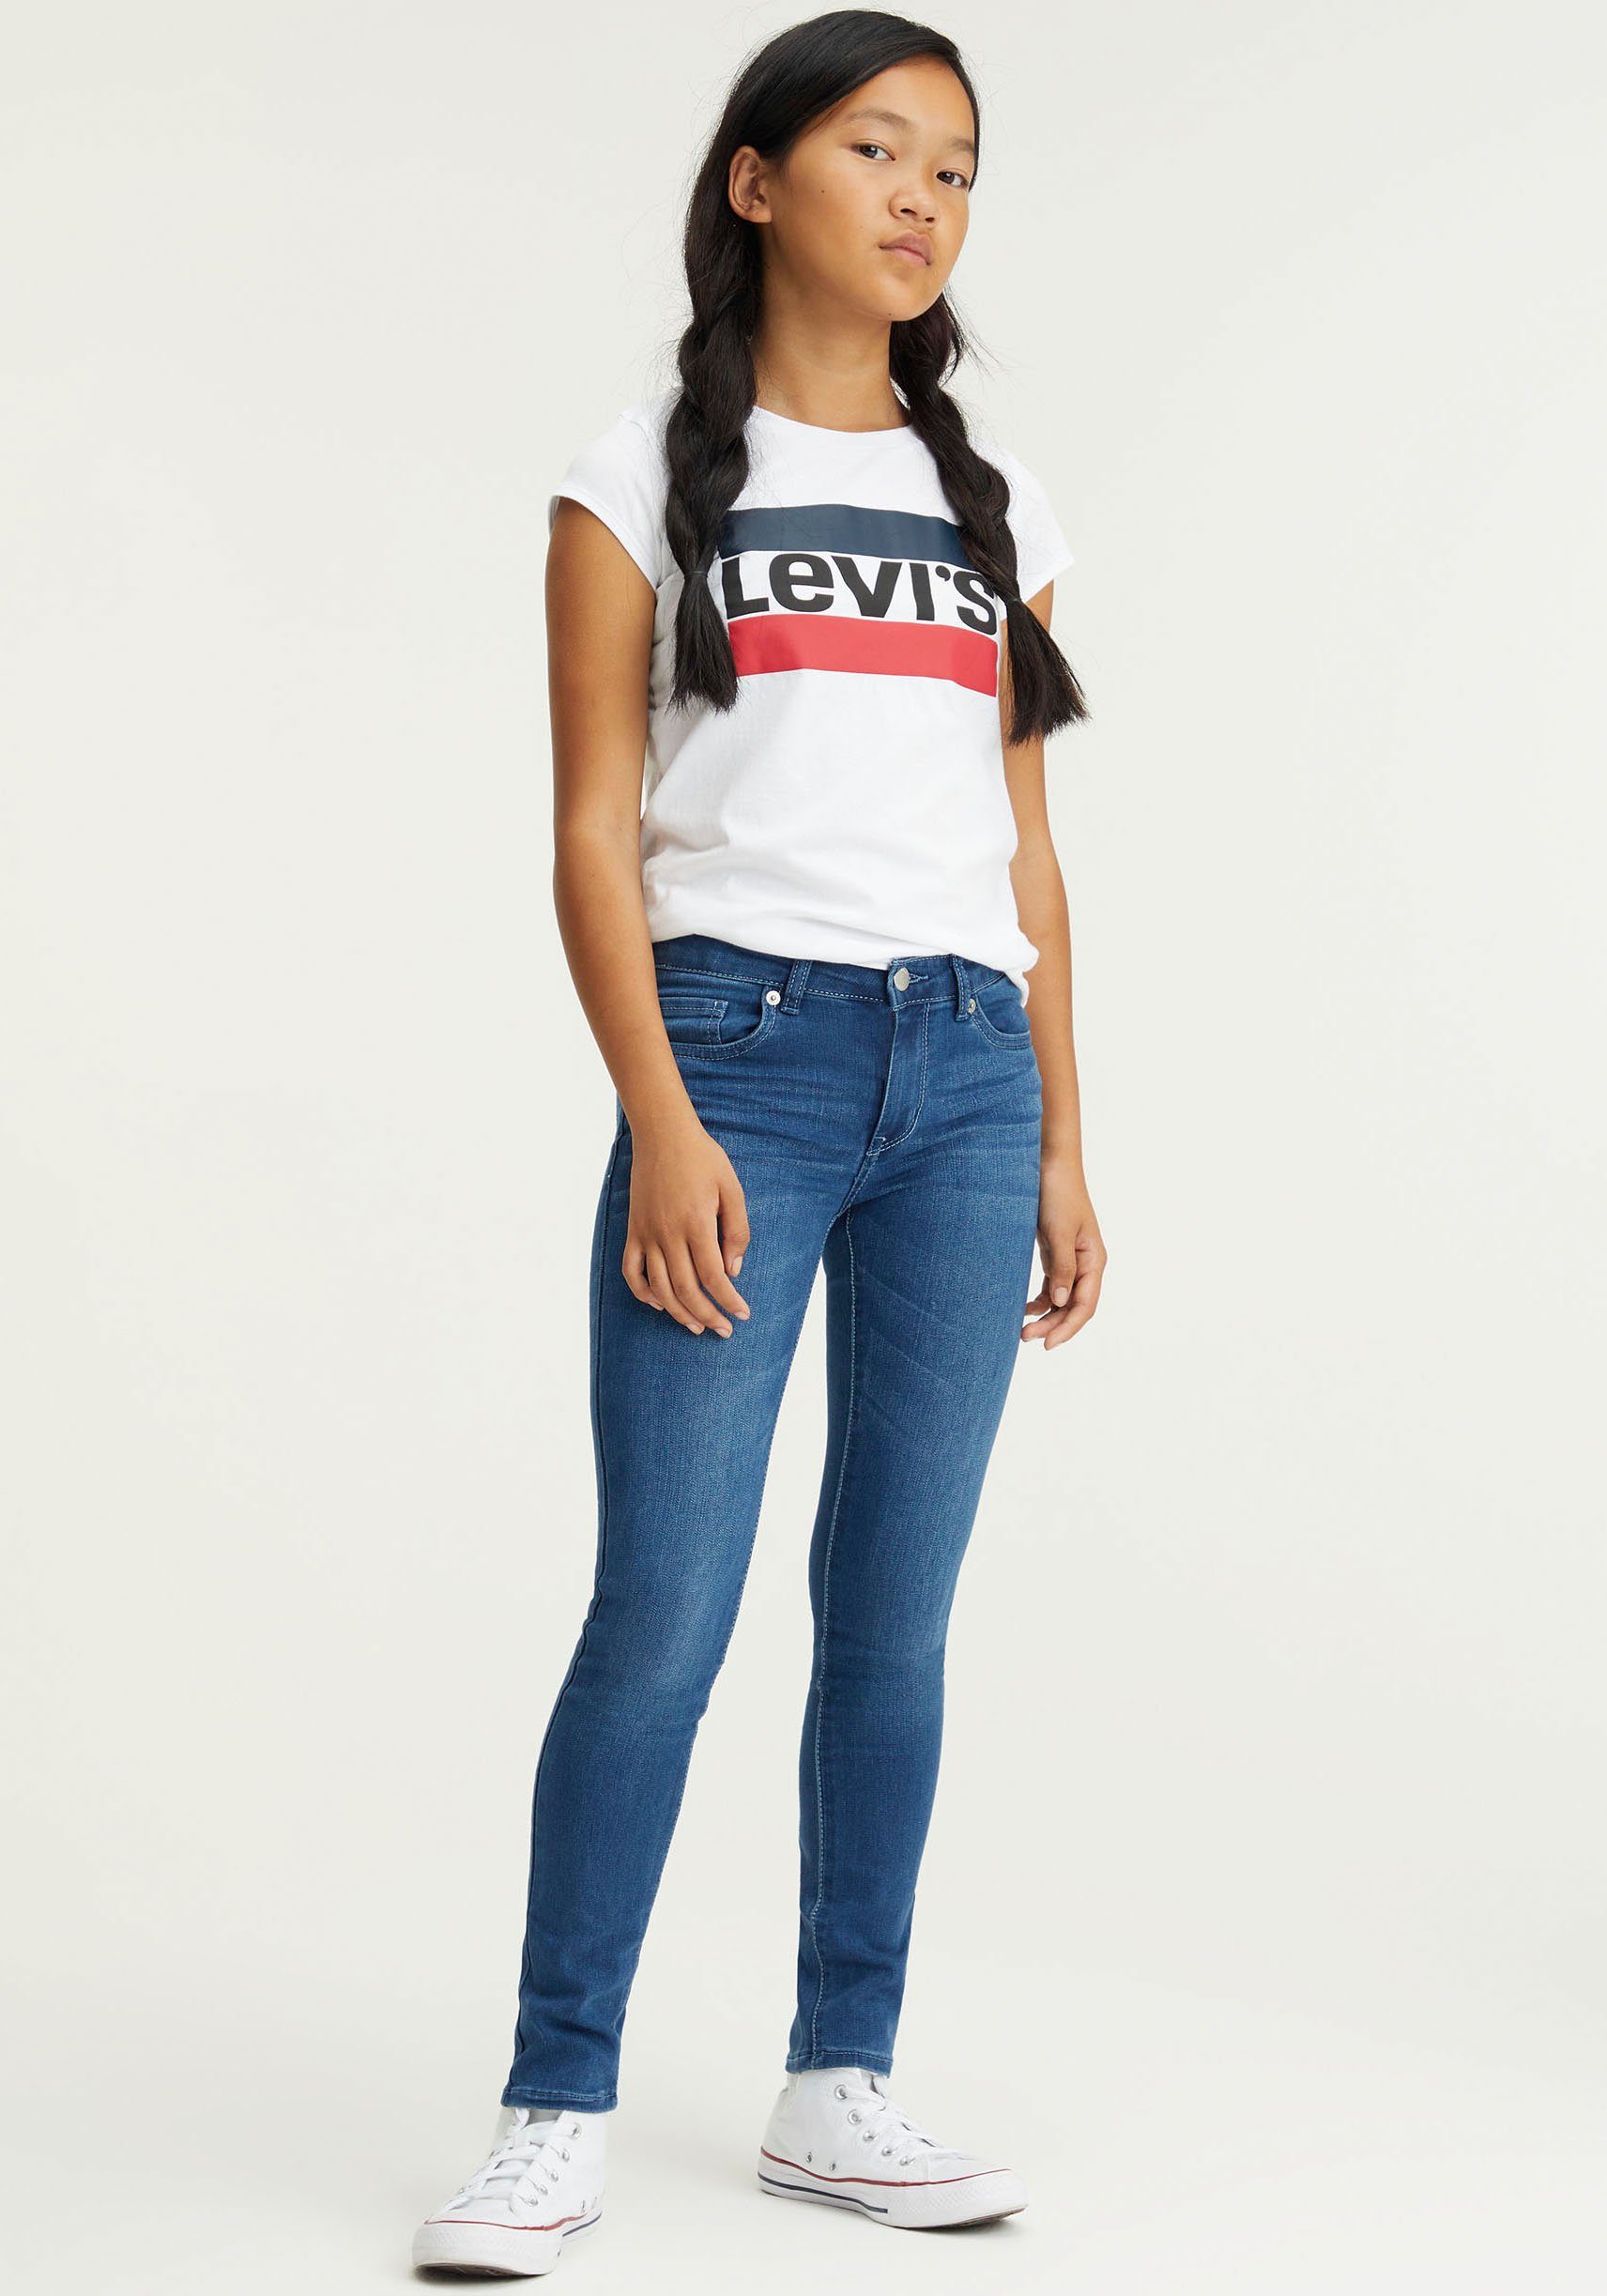 711™ Levi's® SKINNY GIRLS Stretch-Jeans JEANS FIT for Kids